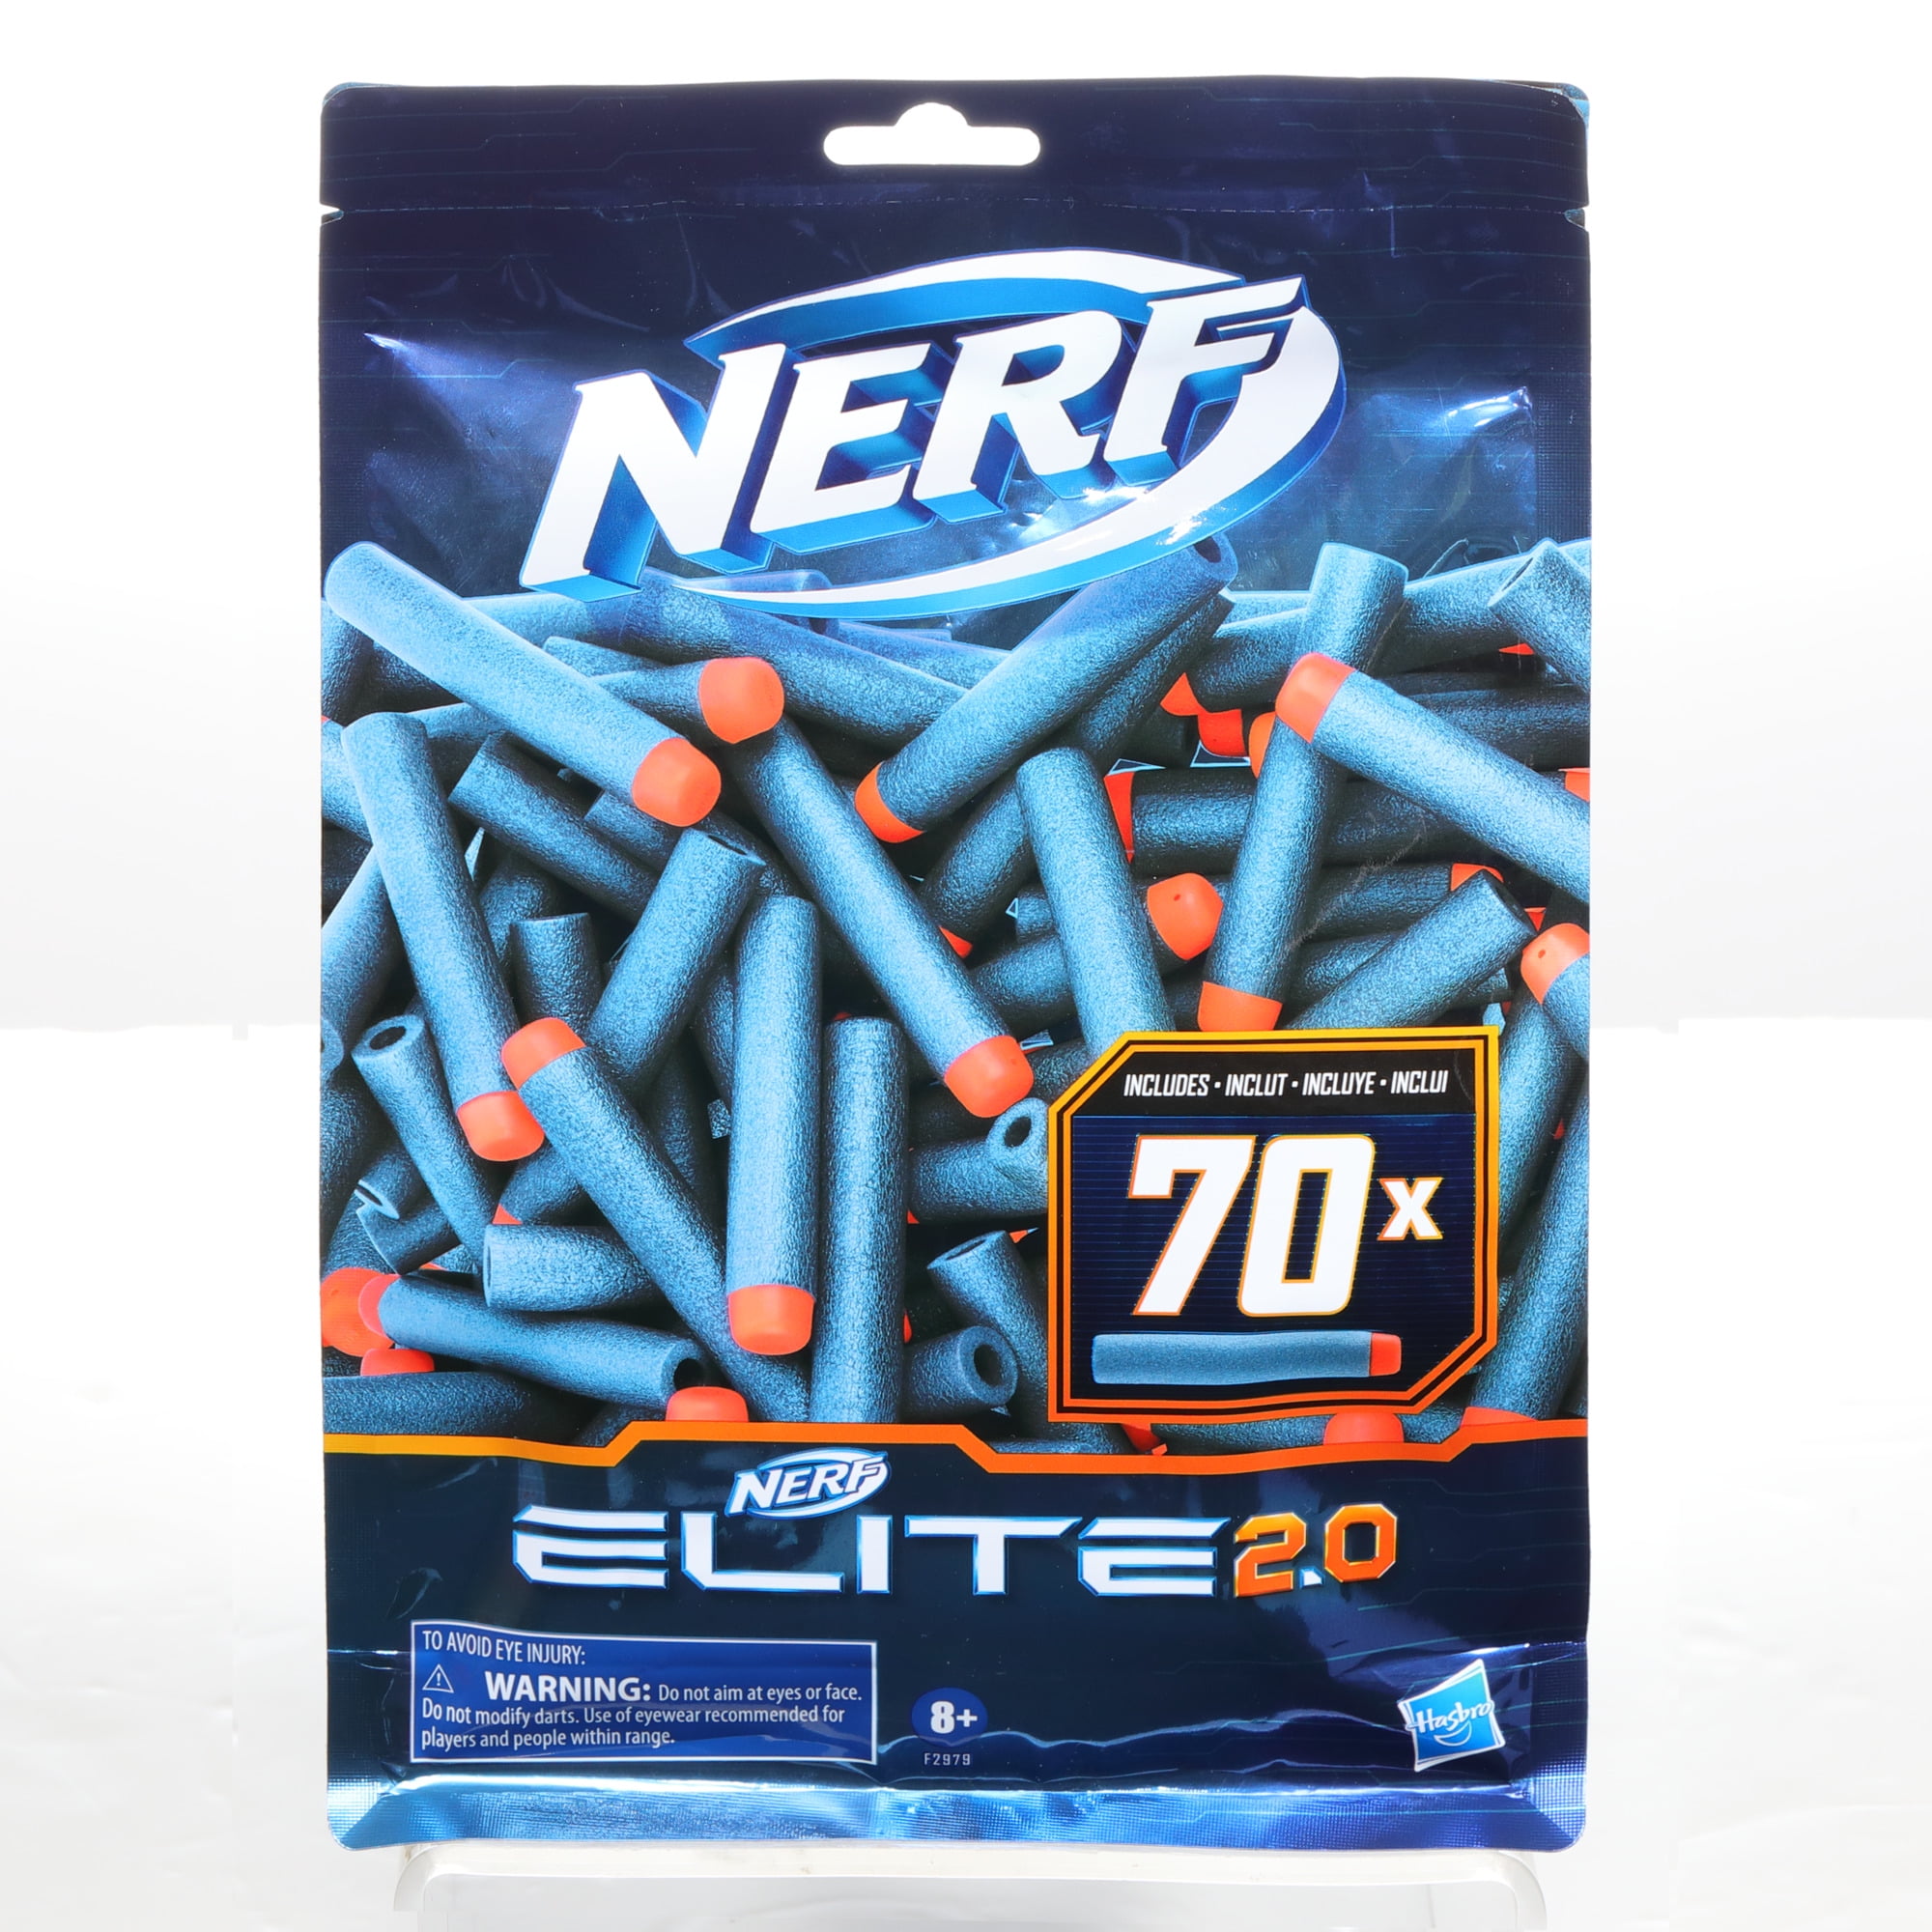 ANY QUANTITY Brand New for Nerf Bullets Darts Blue Refills 